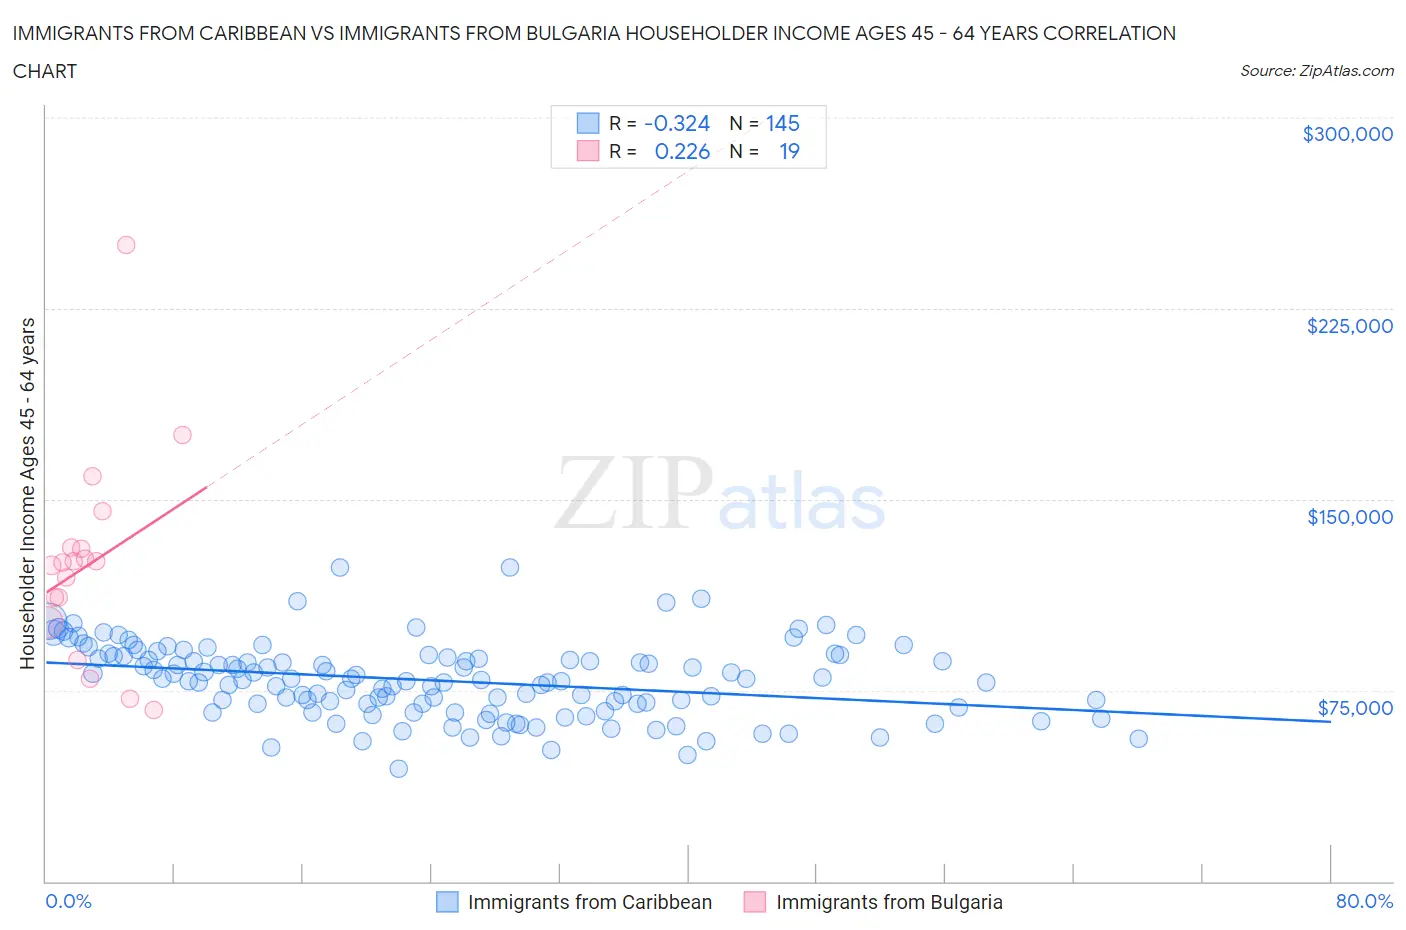 Immigrants from Caribbean vs Immigrants from Bulgaria Householder Income Ages 45 - 64 years